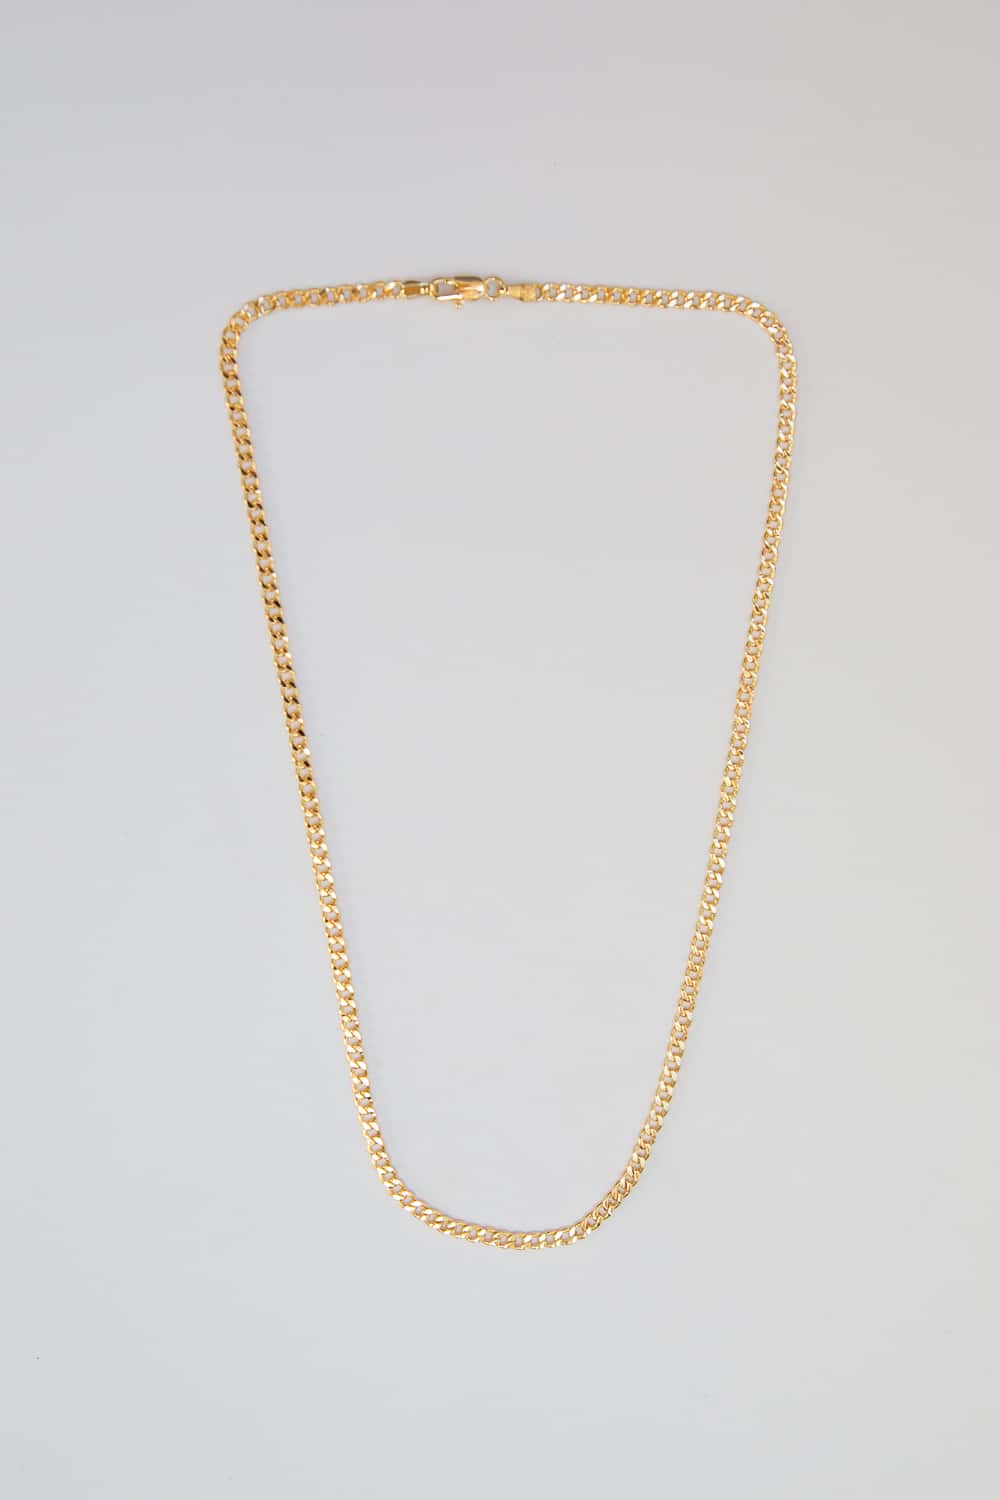 Gold Filled Chain | Rare Bloom Boutique